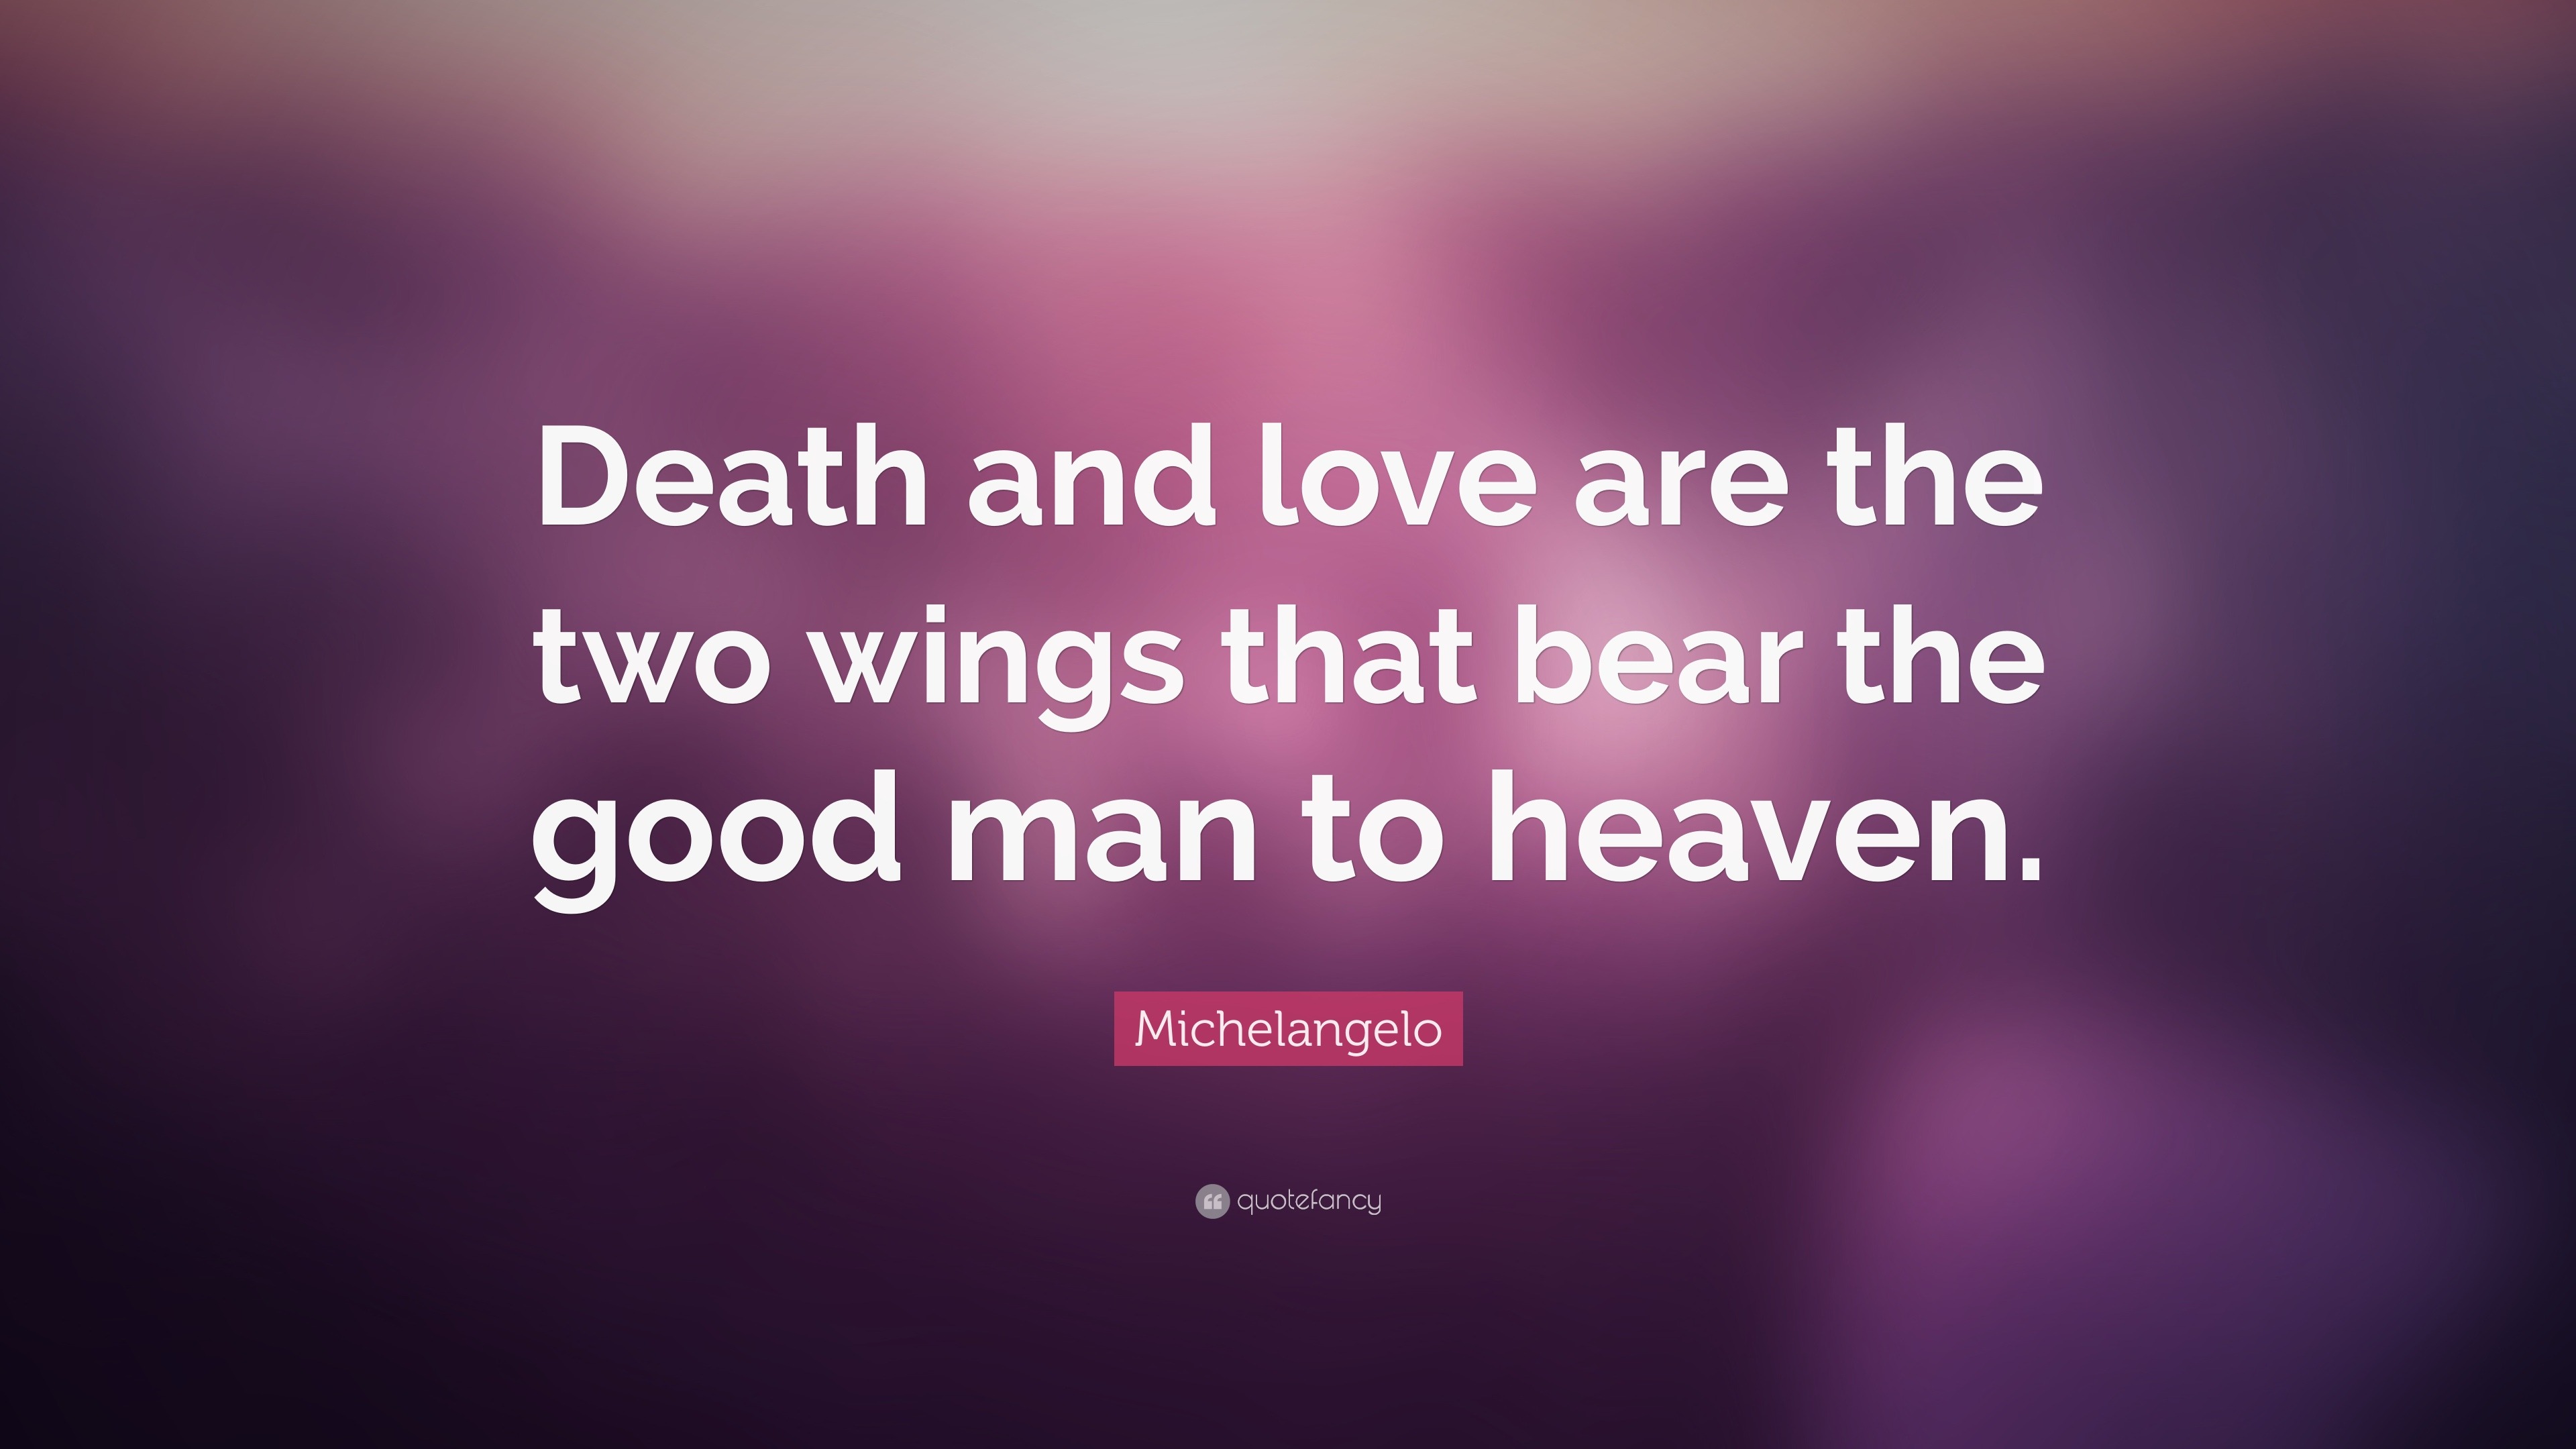 Michelangelo Quote “Death and love are the two wings that bear the good man